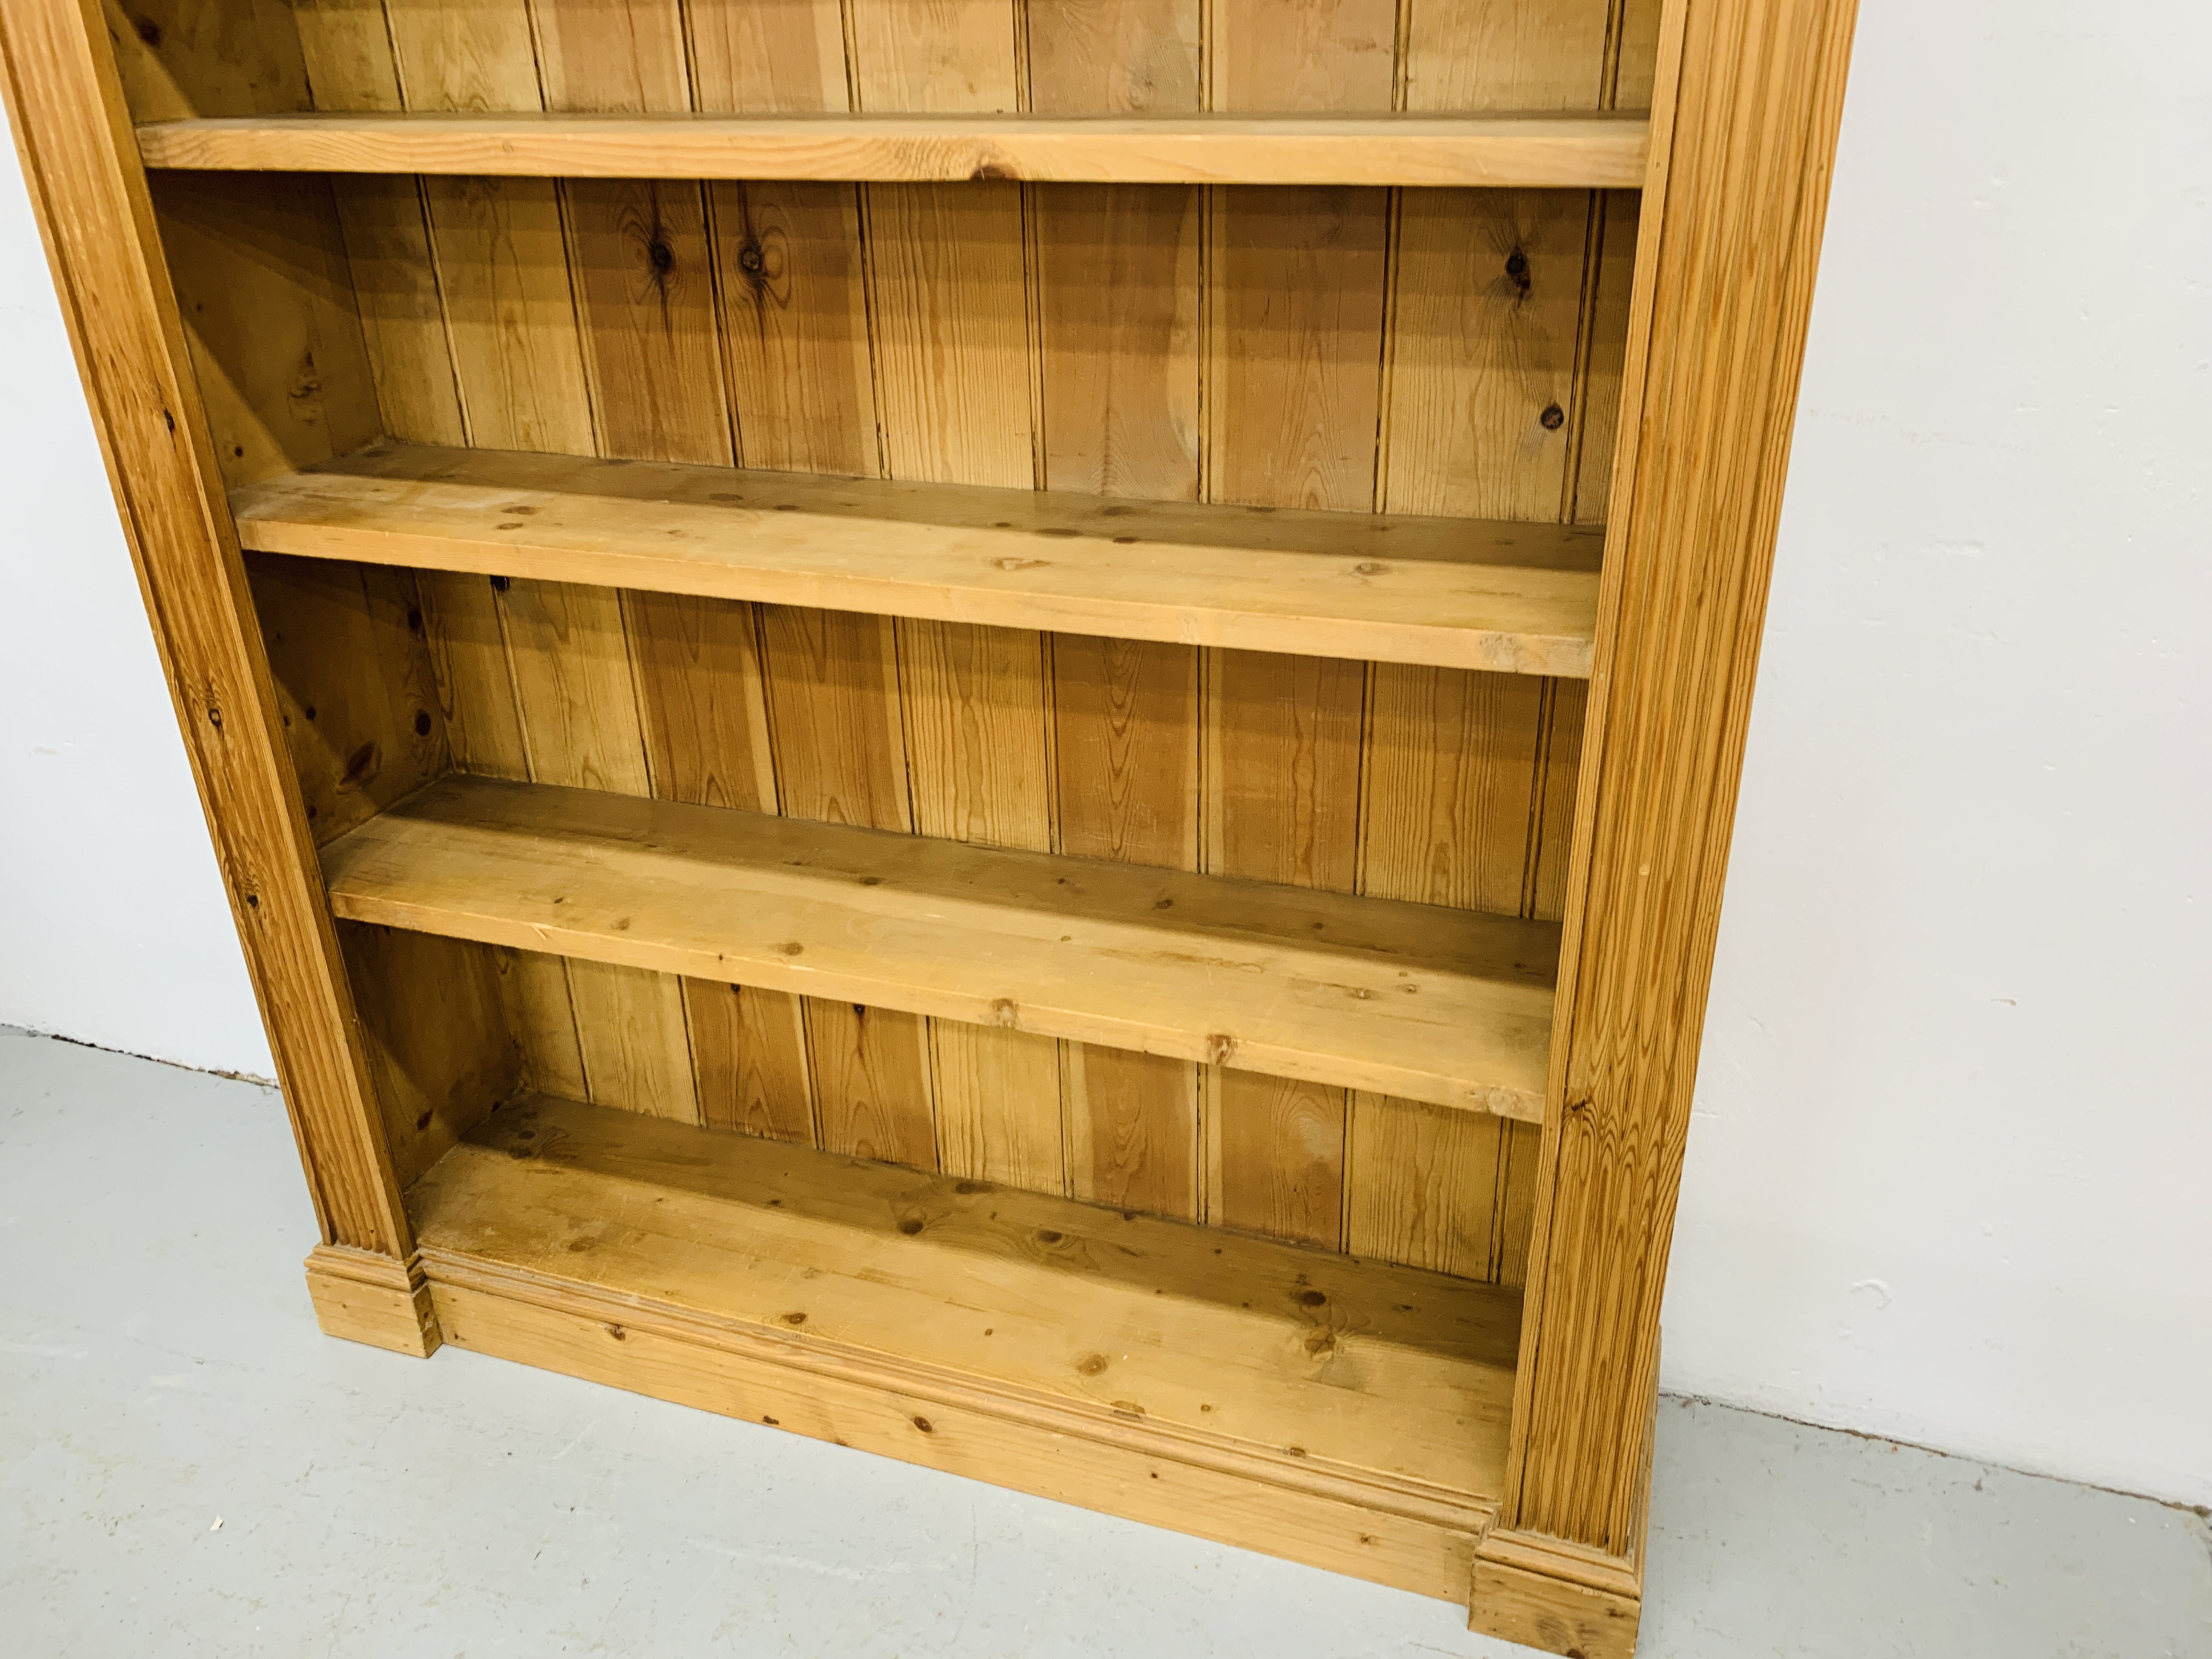 A SOLID WAXED PINE FULL HEIGHT BOOKSHELF - H 198 CM. W 138CM. - Image 4 of 5